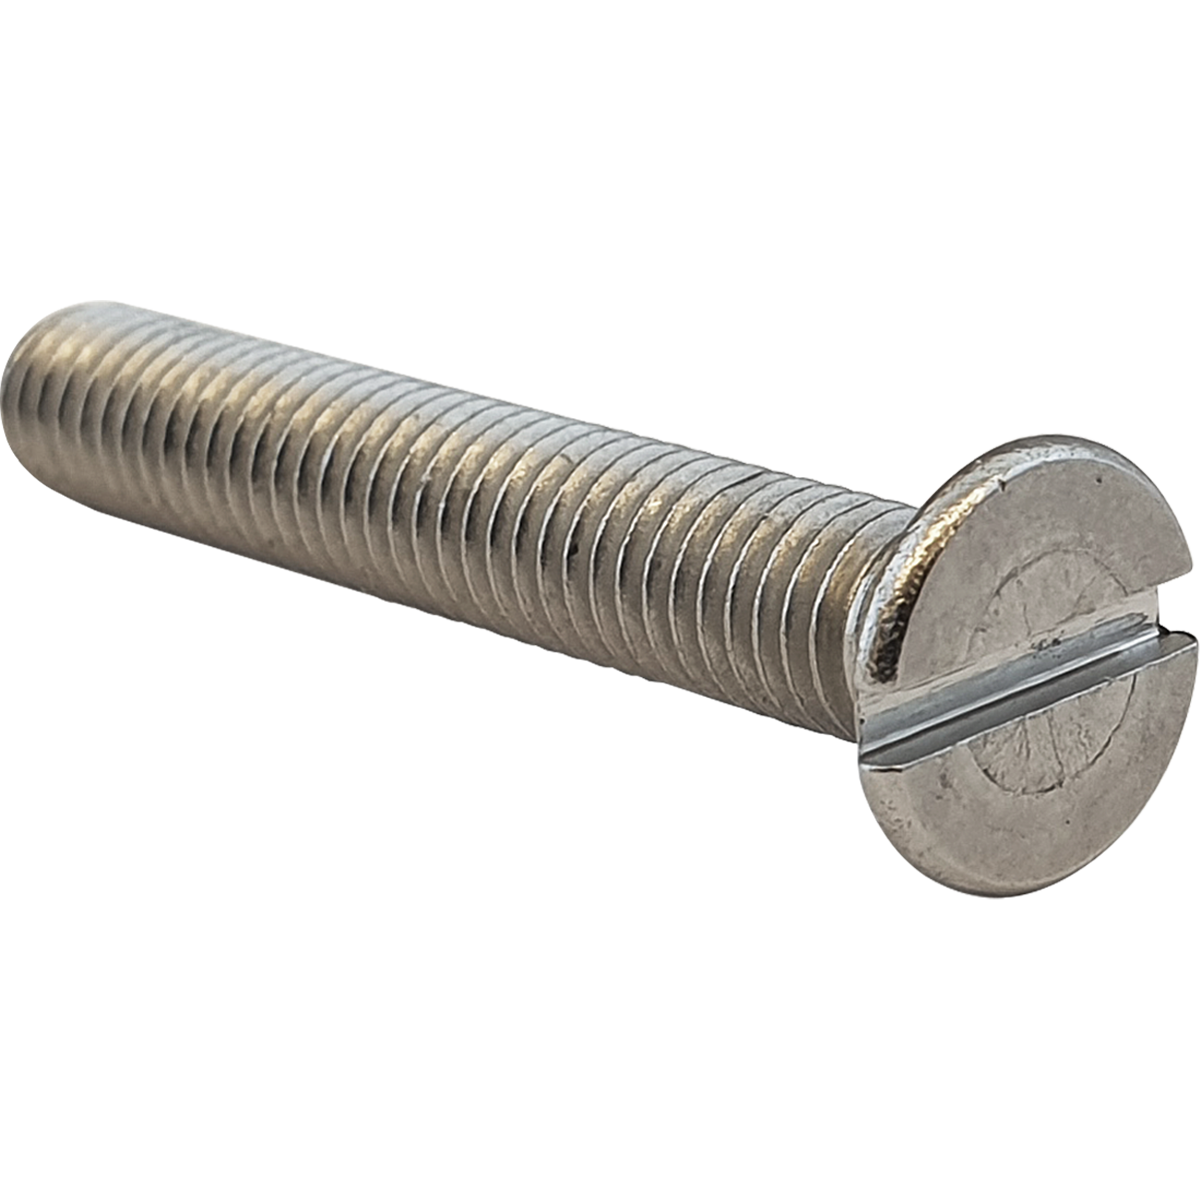 Metric, slotted, countersunk Machine Screws, manufactured in A2 stainless steel for a good level of corrosion resistance.